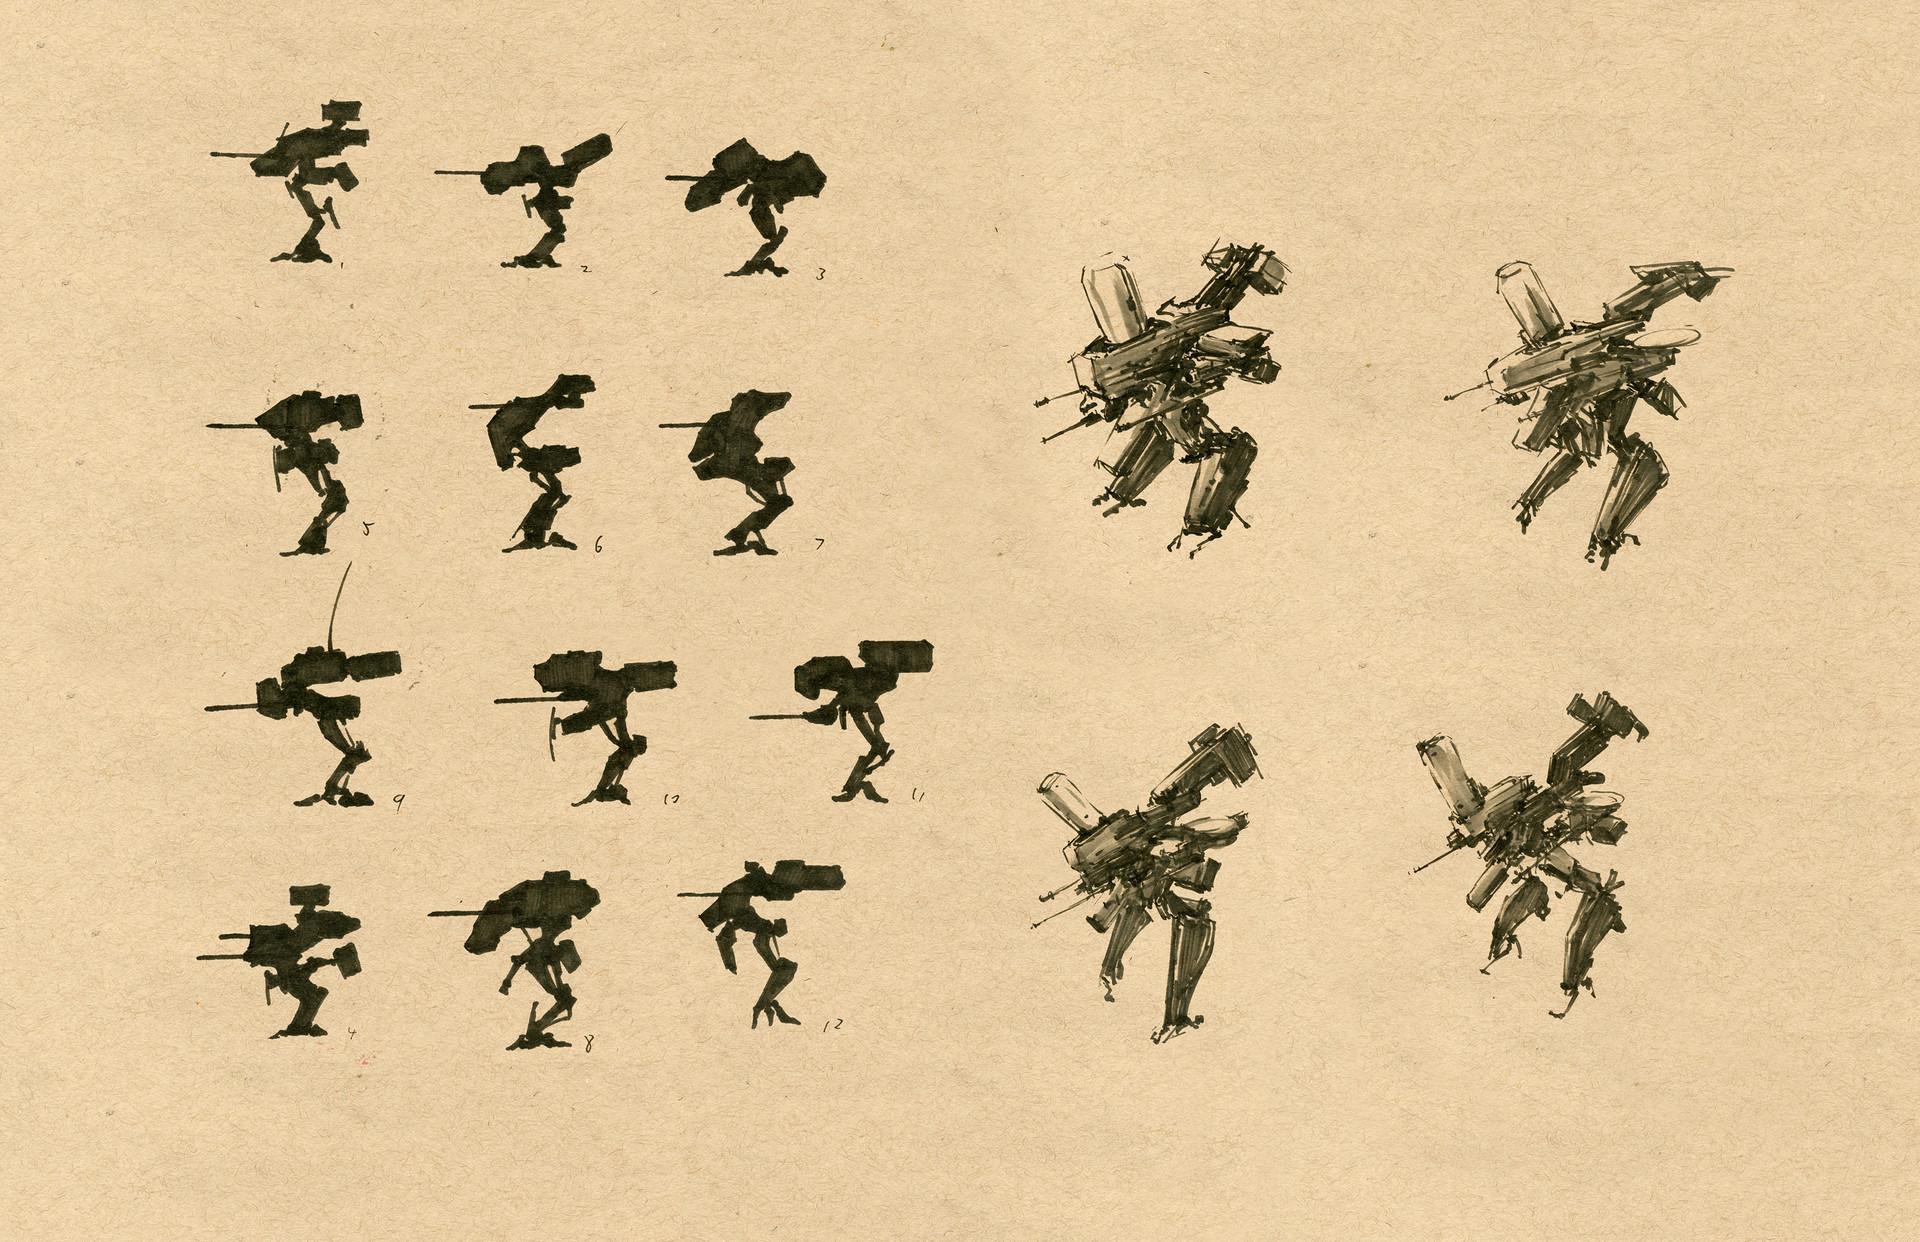 Fine Art: An Old-Timey Guide To Giant Fighting Mechs